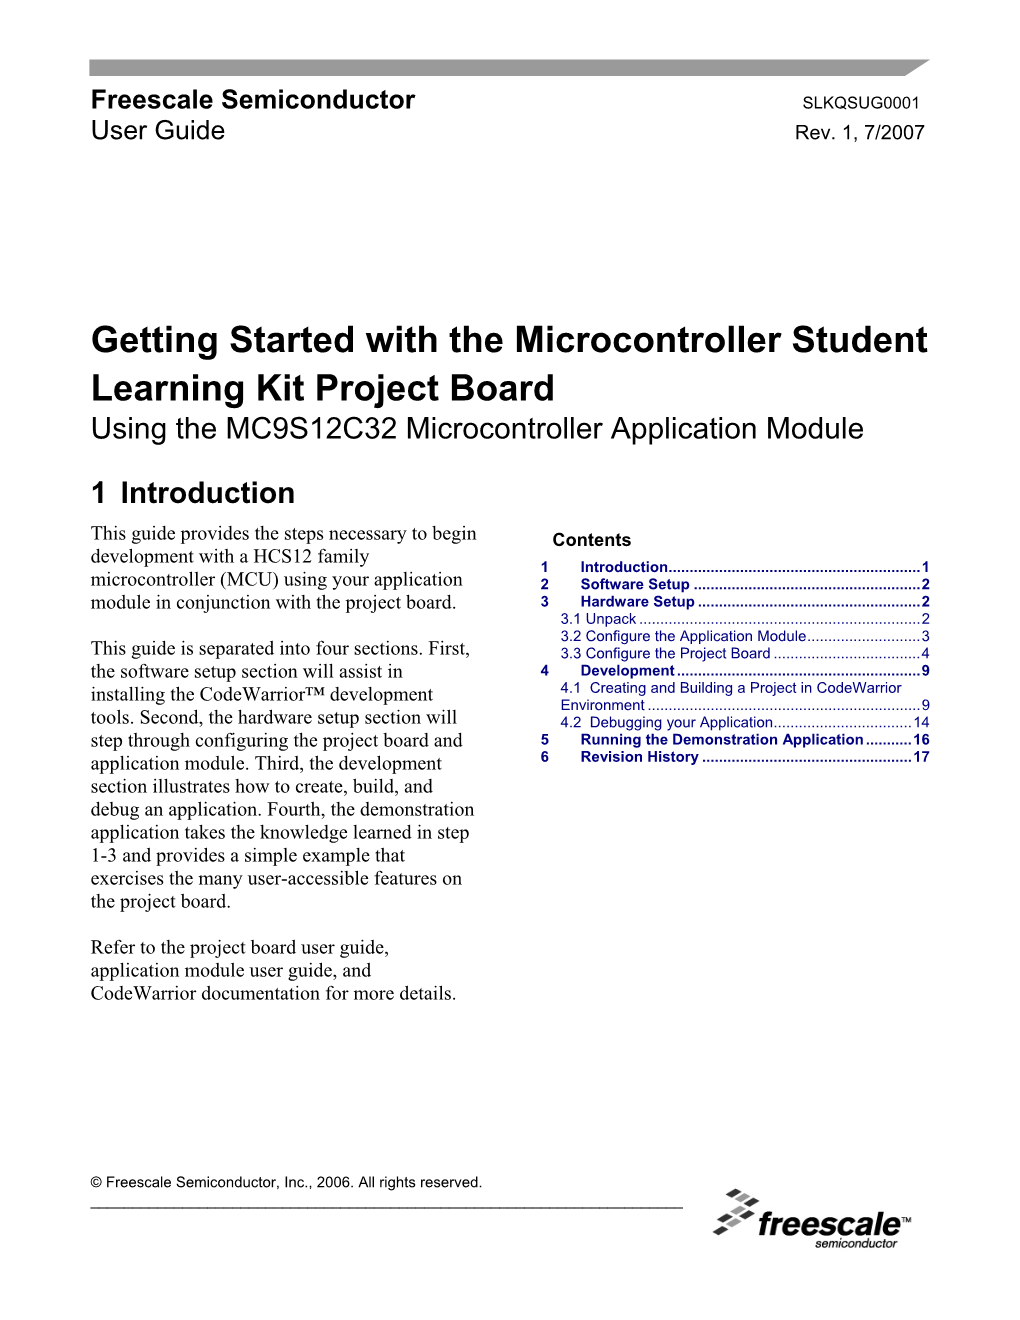 Getting Started with the Microcontroller Student Learning Kit Project Board Using the MC9S12C32 Microcontroller Application Module